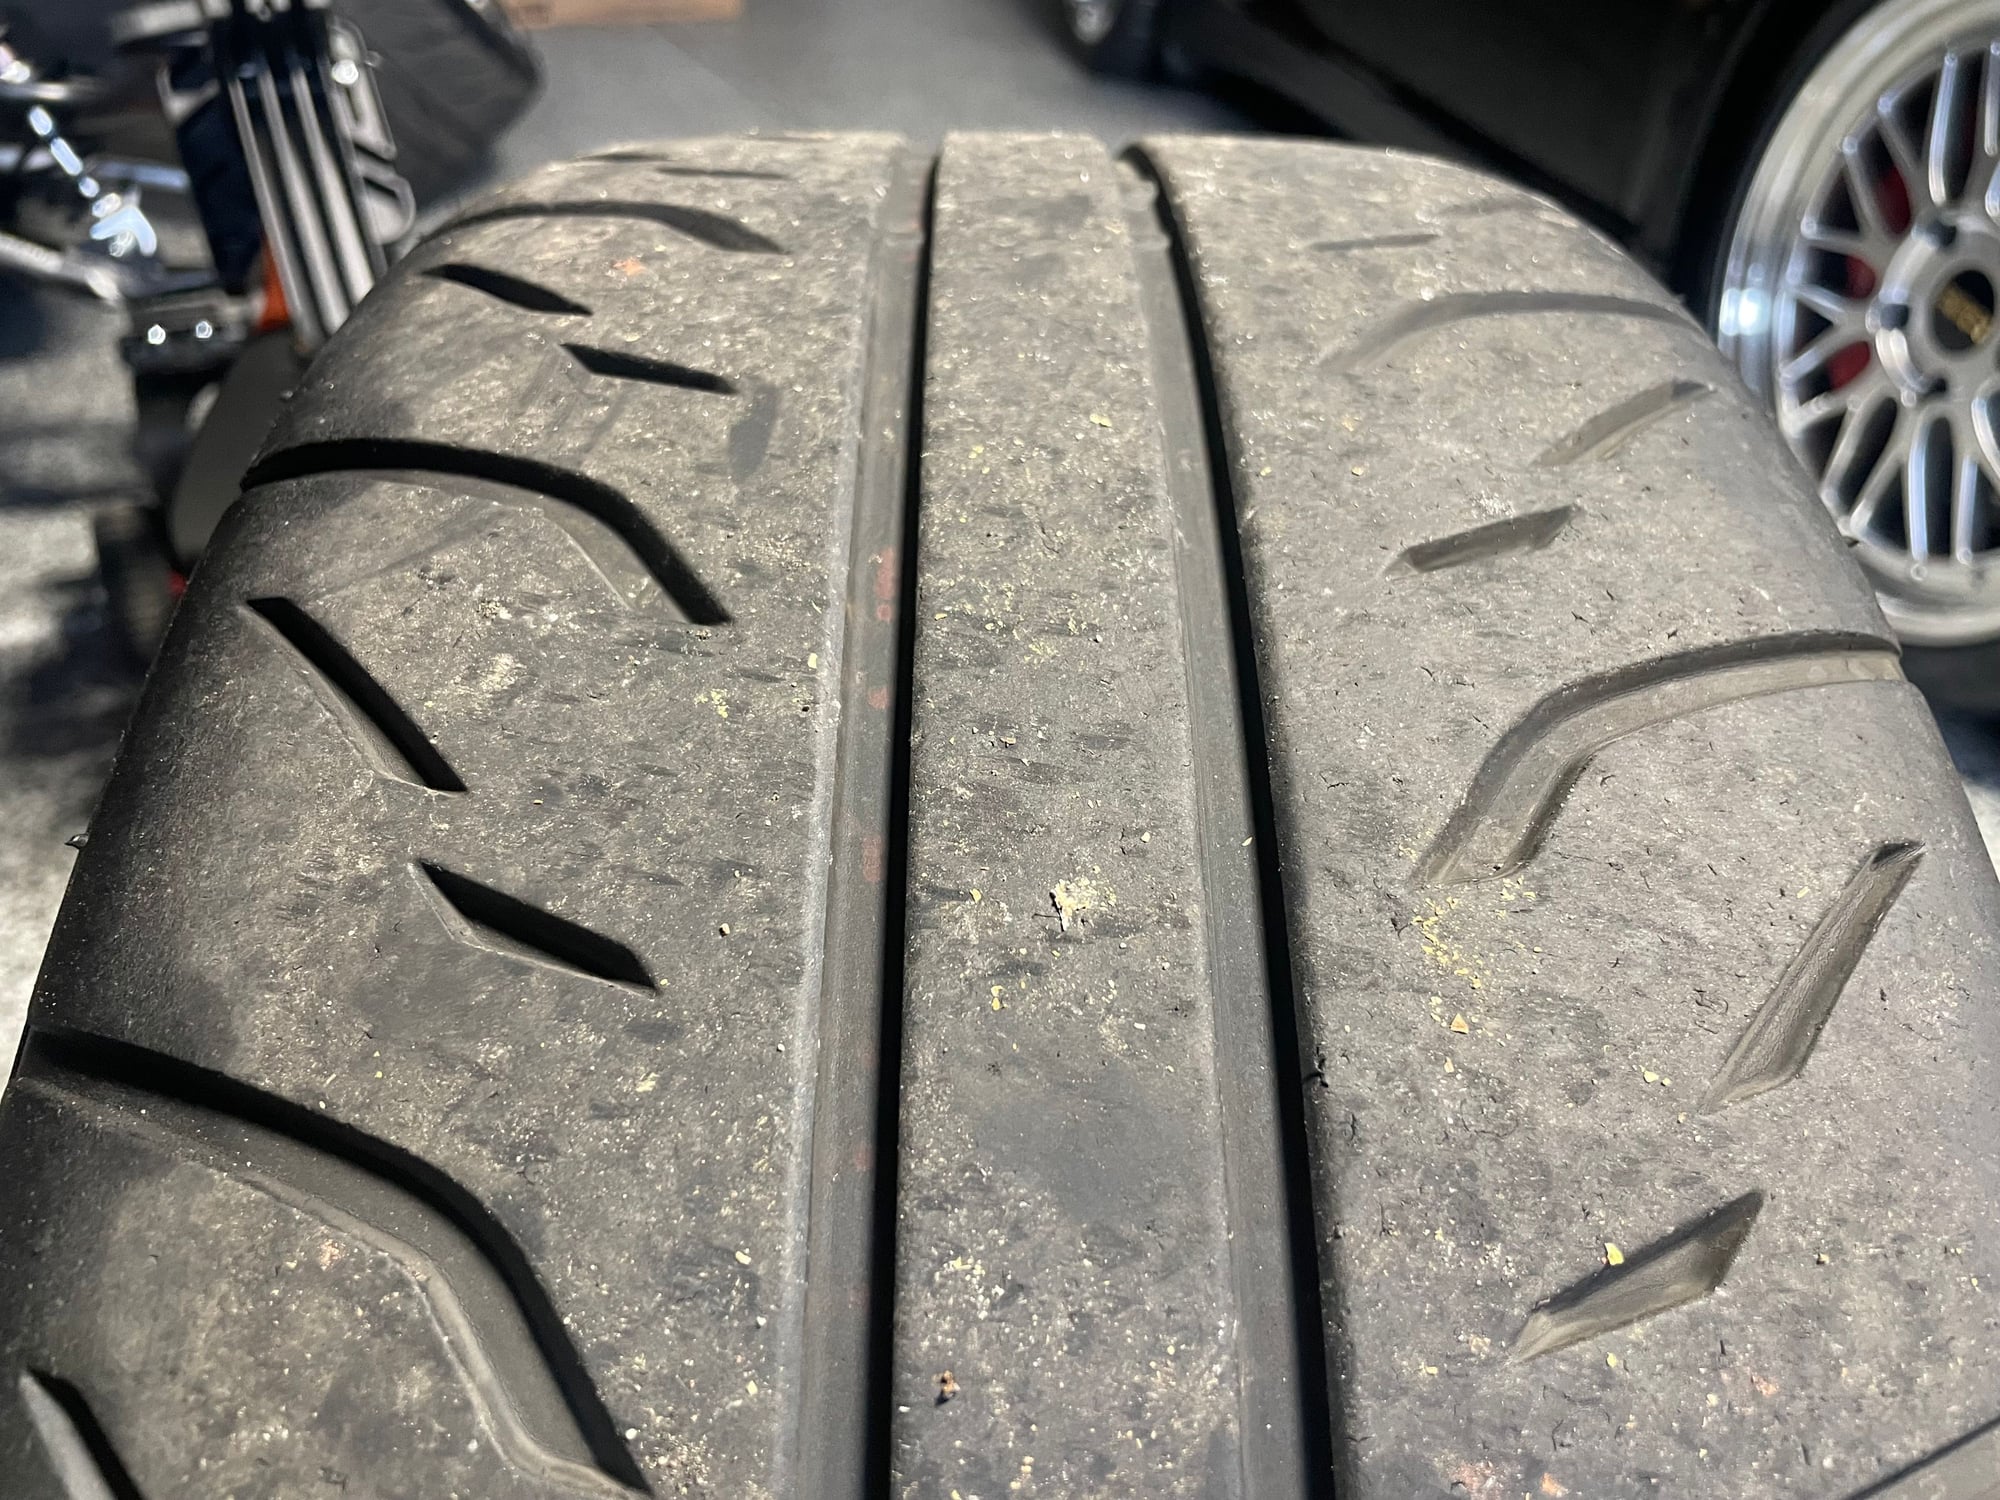 Wheels and Tires/Axles - Champion Motorsport Forged Monolite RS98 Wheels w/ Bridgestone RE-71R Tires - Used - 1997 to 2011 Porsche 911 - Denver, CO 80212, United States